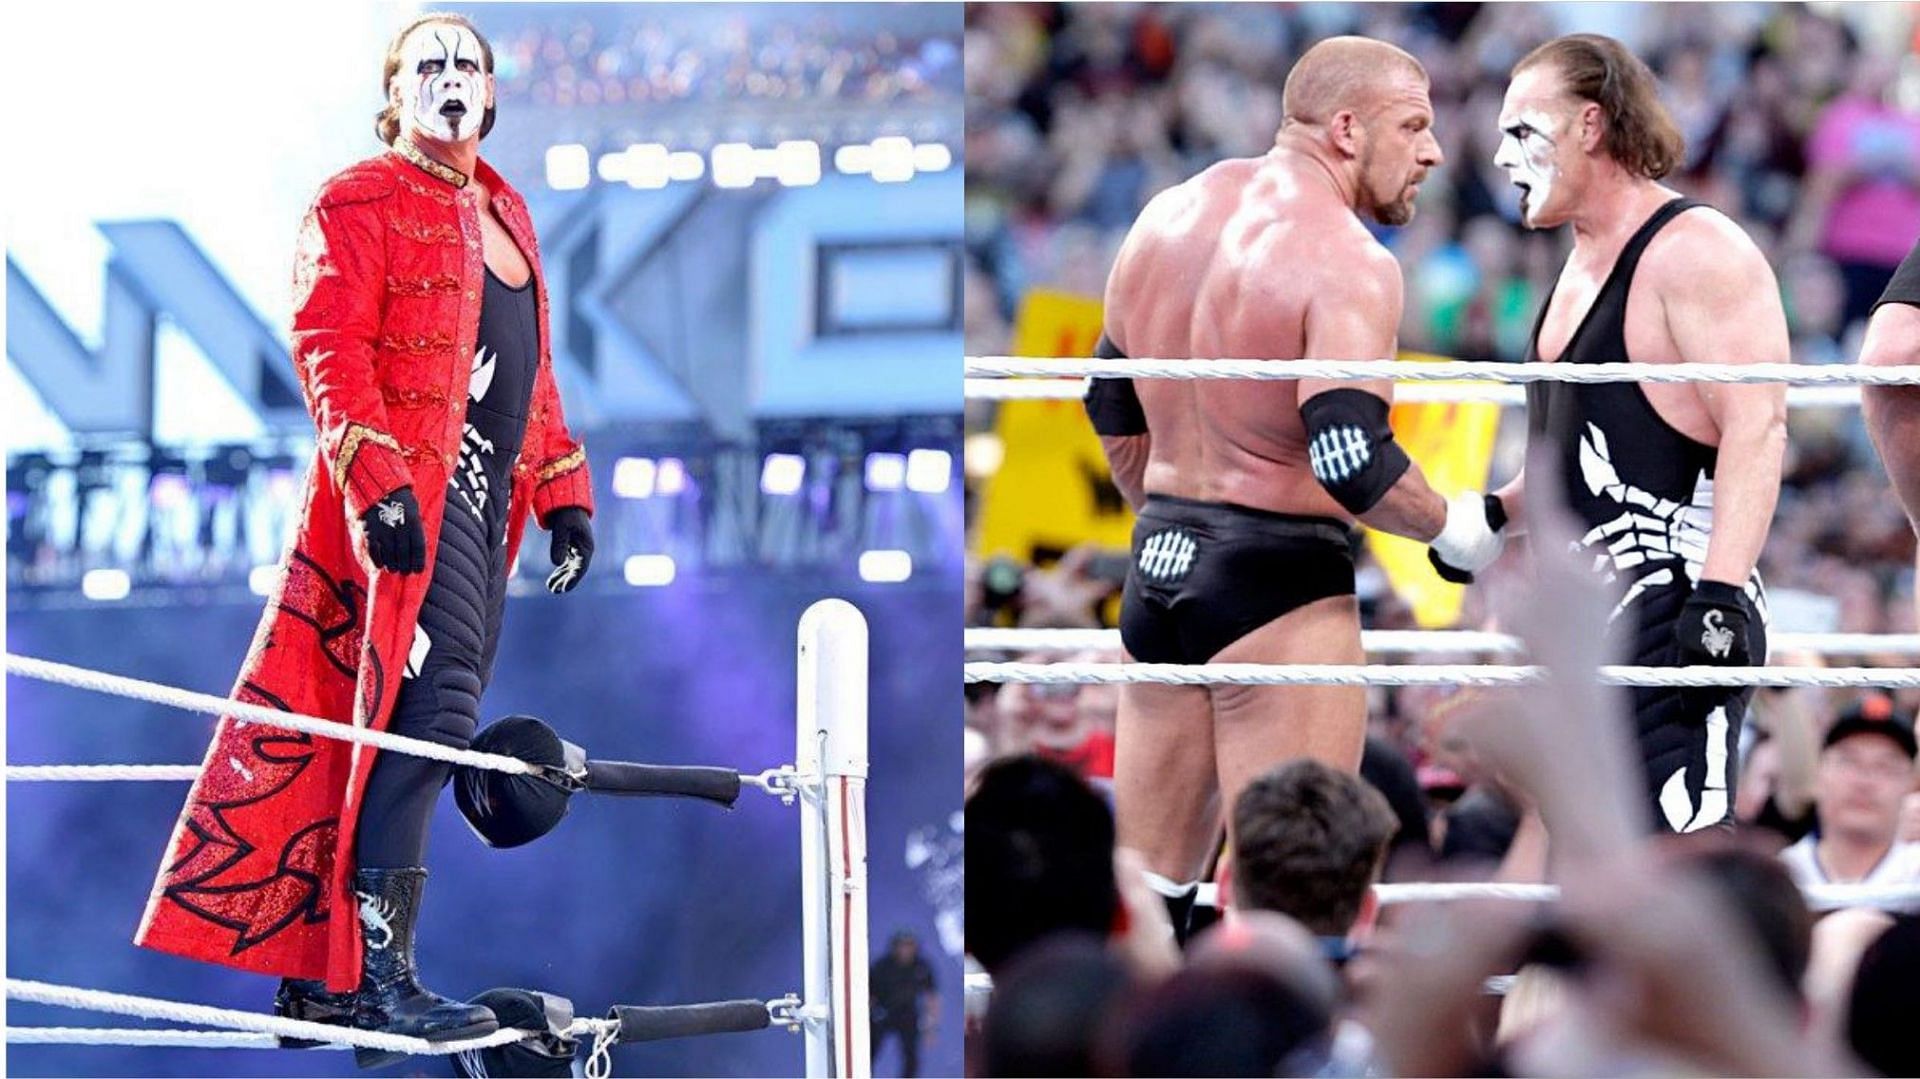 Sting made his WWE in-ring debut at WrestleMania 31